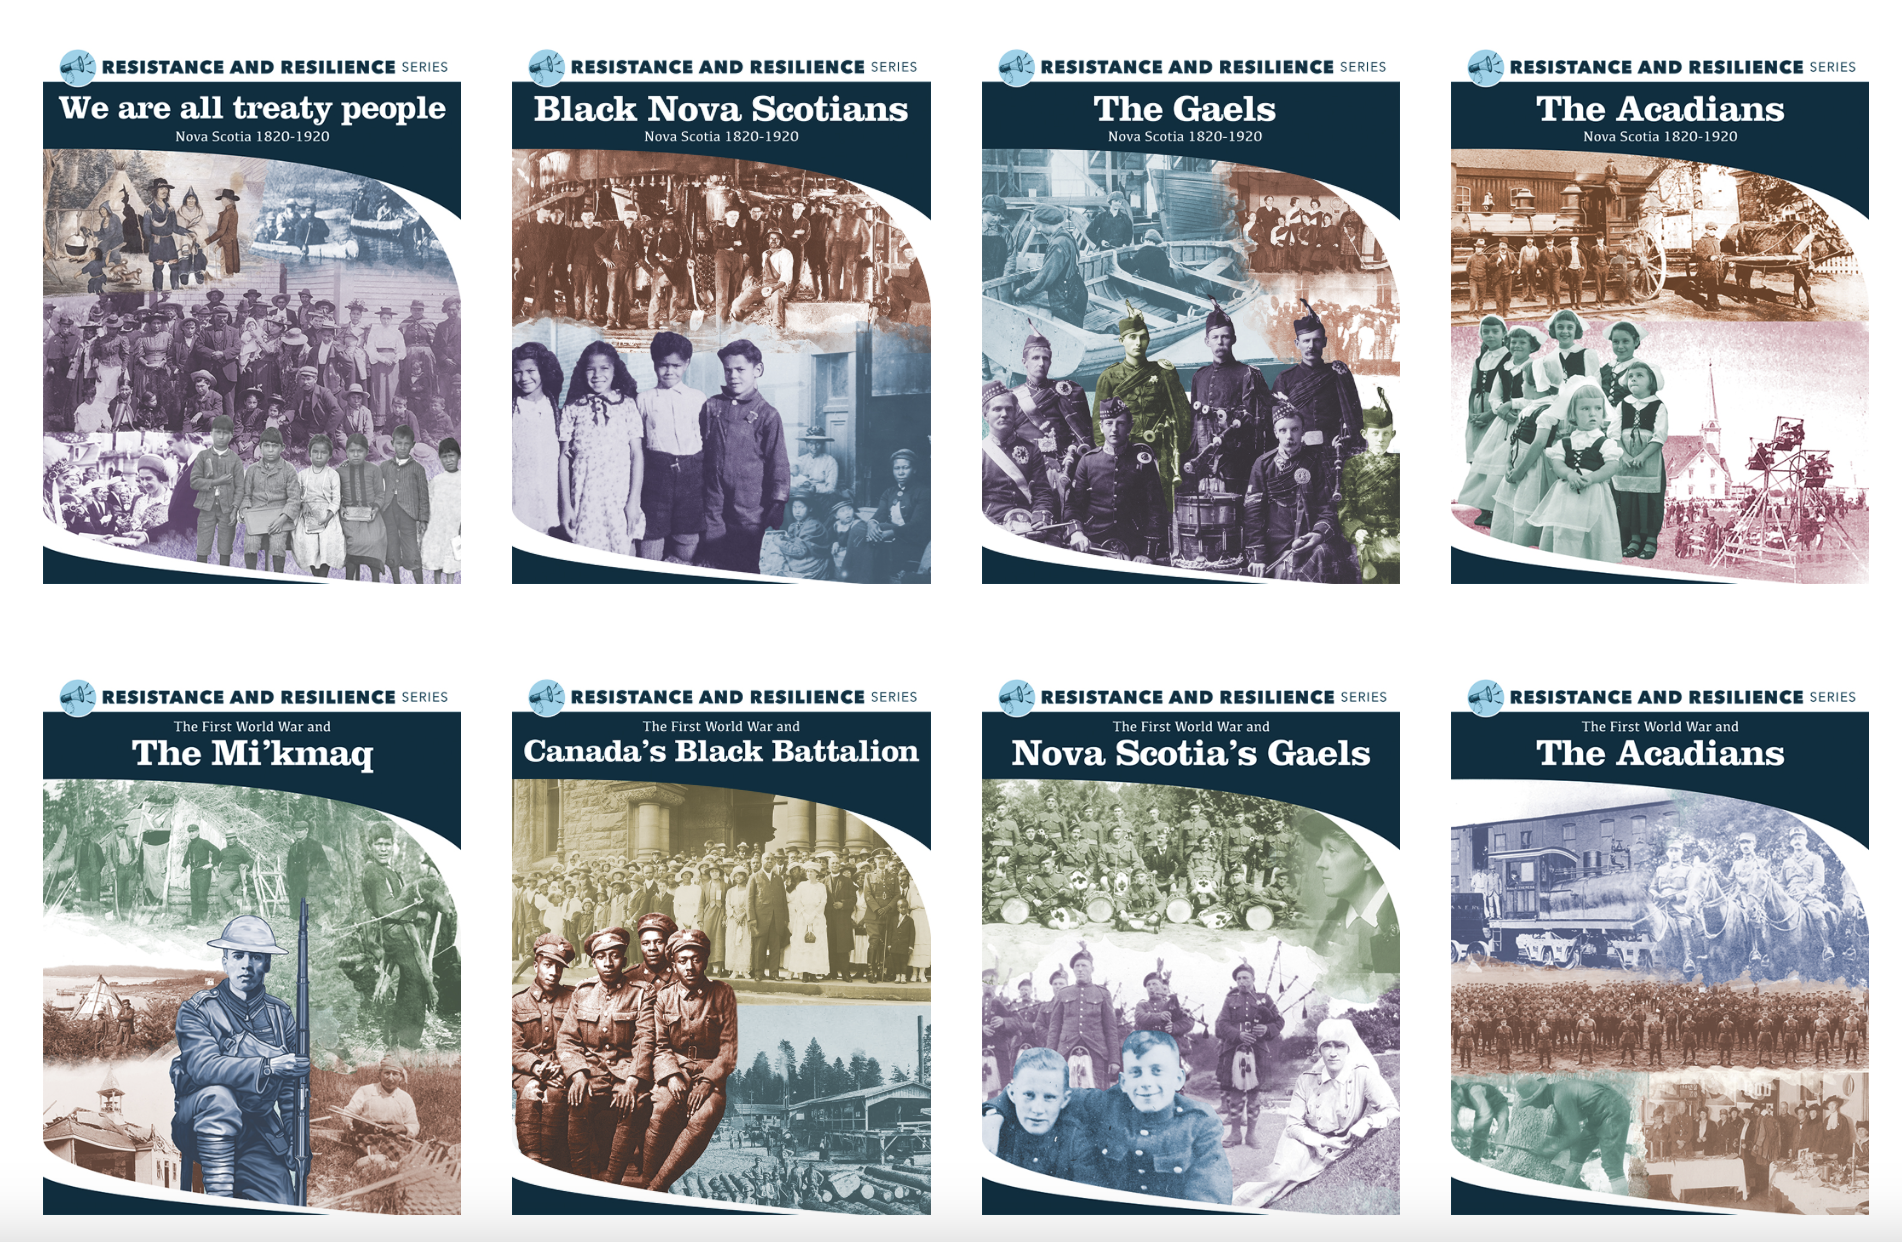 Shows the 8 book covers of the Resistance and Resilience Set